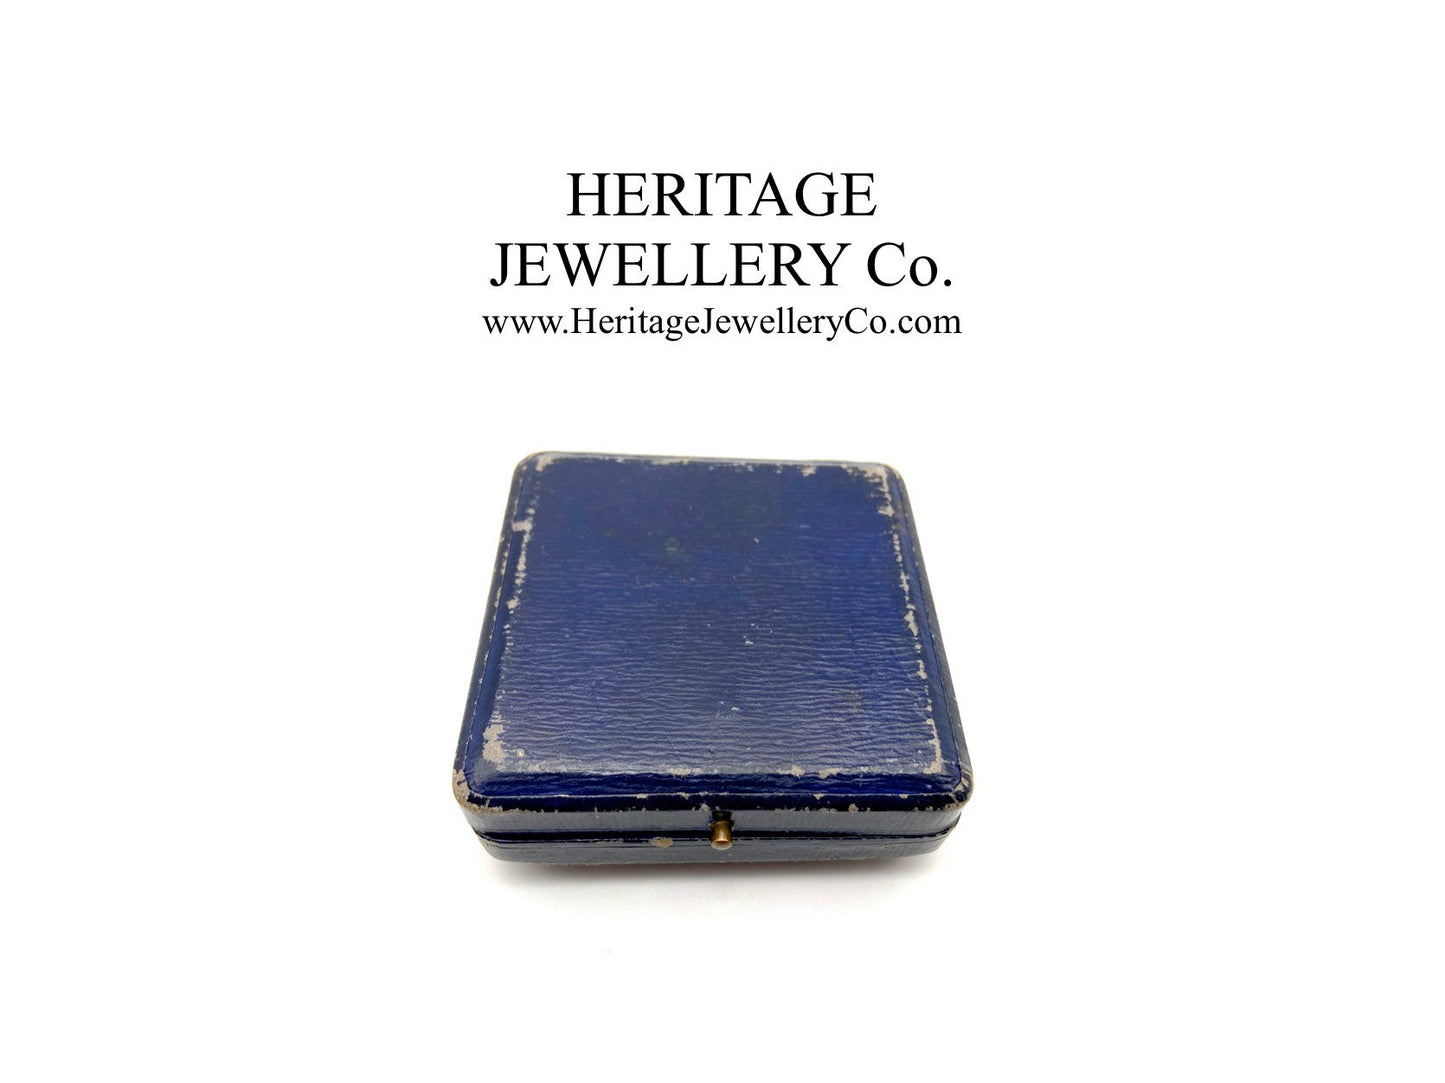 Antique Tooled Leather Jewellery Box